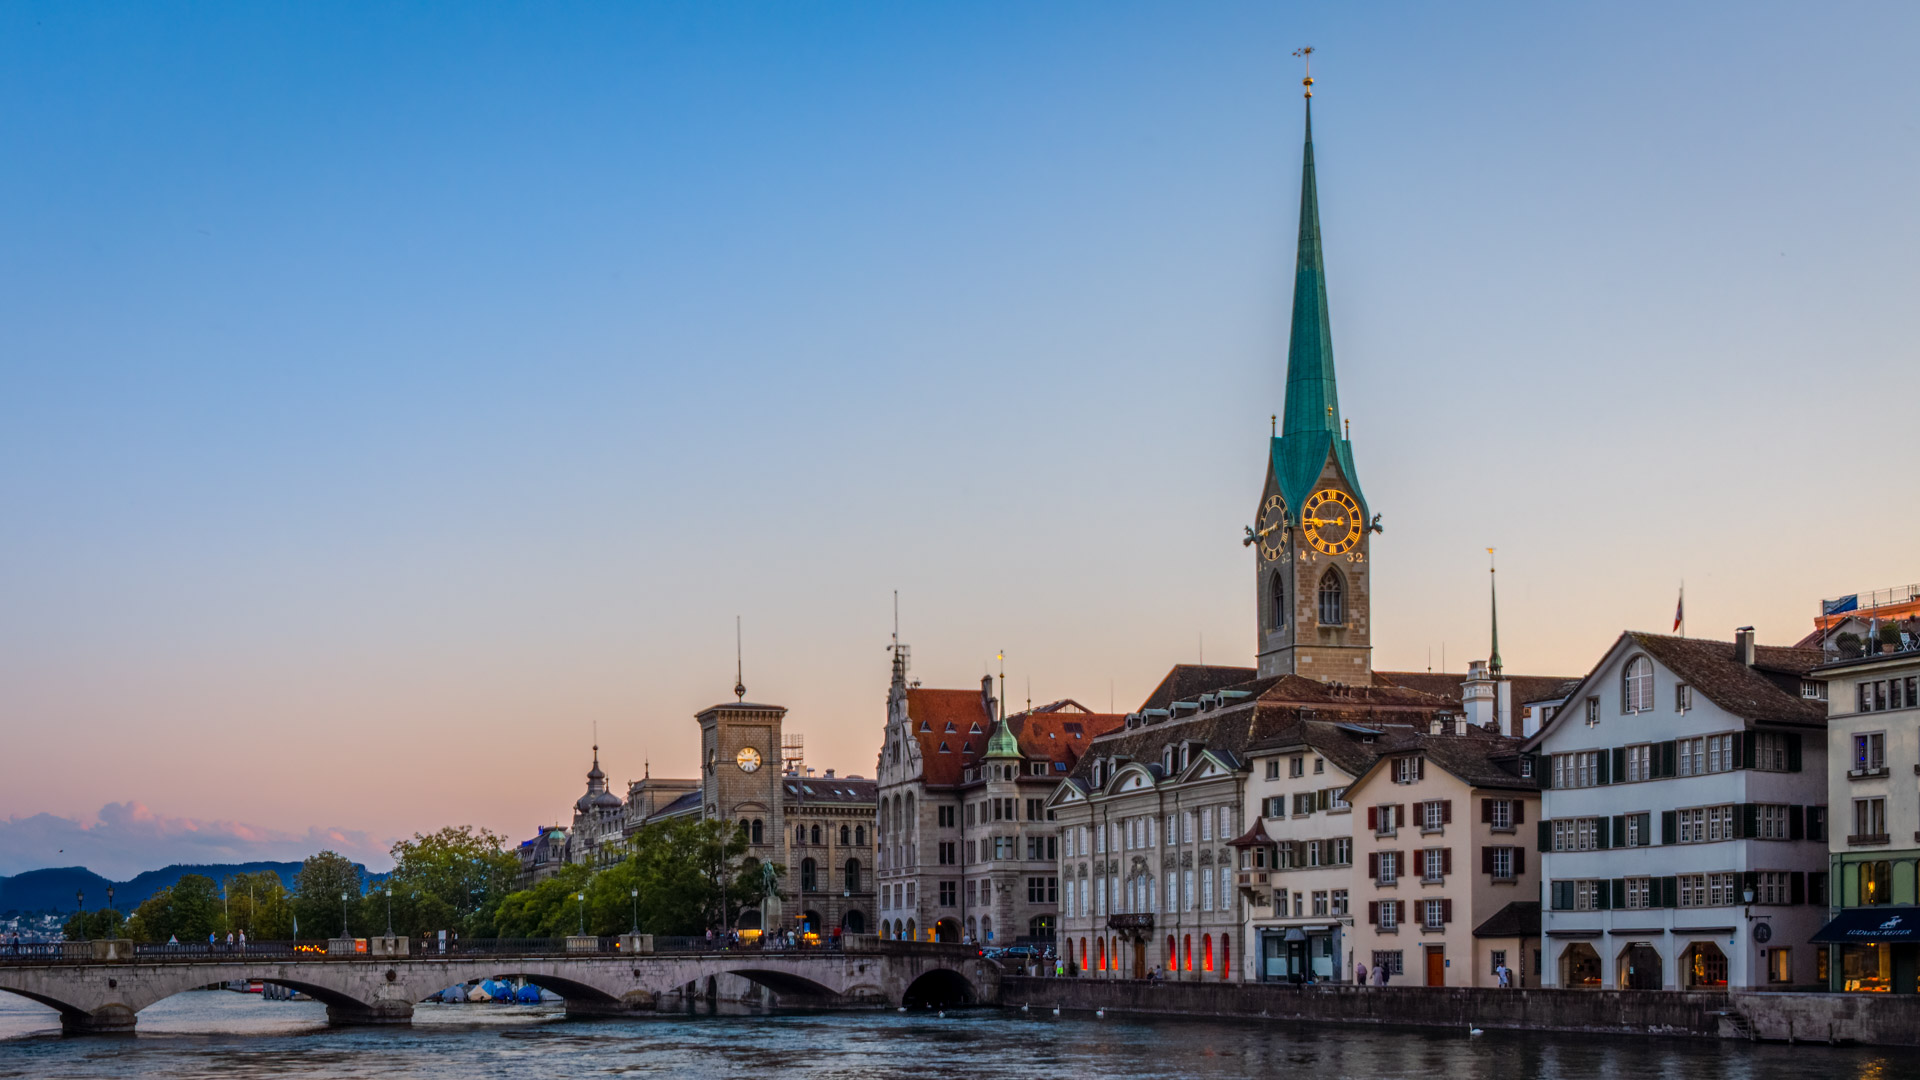 Experience Swiss sophistication with free wallpaper in HD of Zurich city, featuring the picturesque blend of modernity and scenic charm.